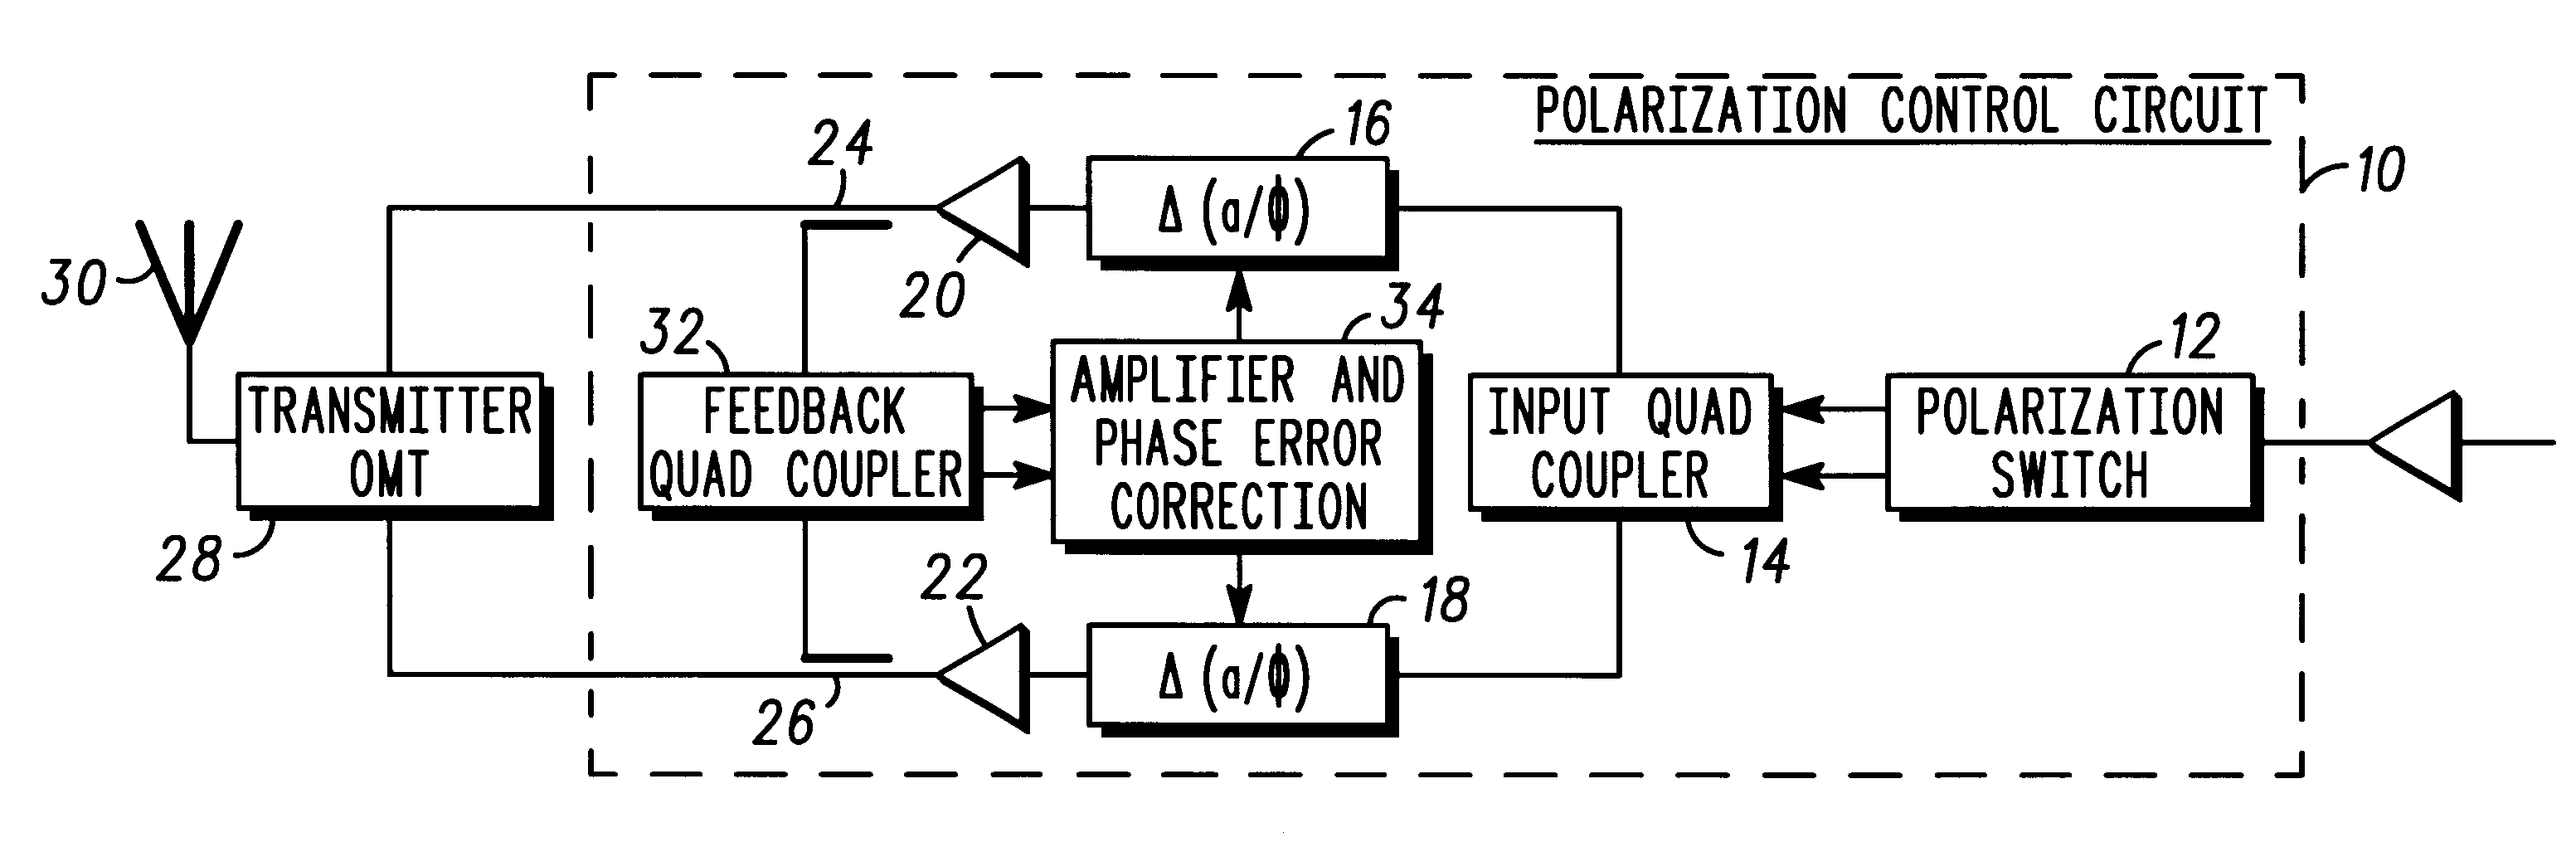 Method for efficiently generating selectable antenna polarization